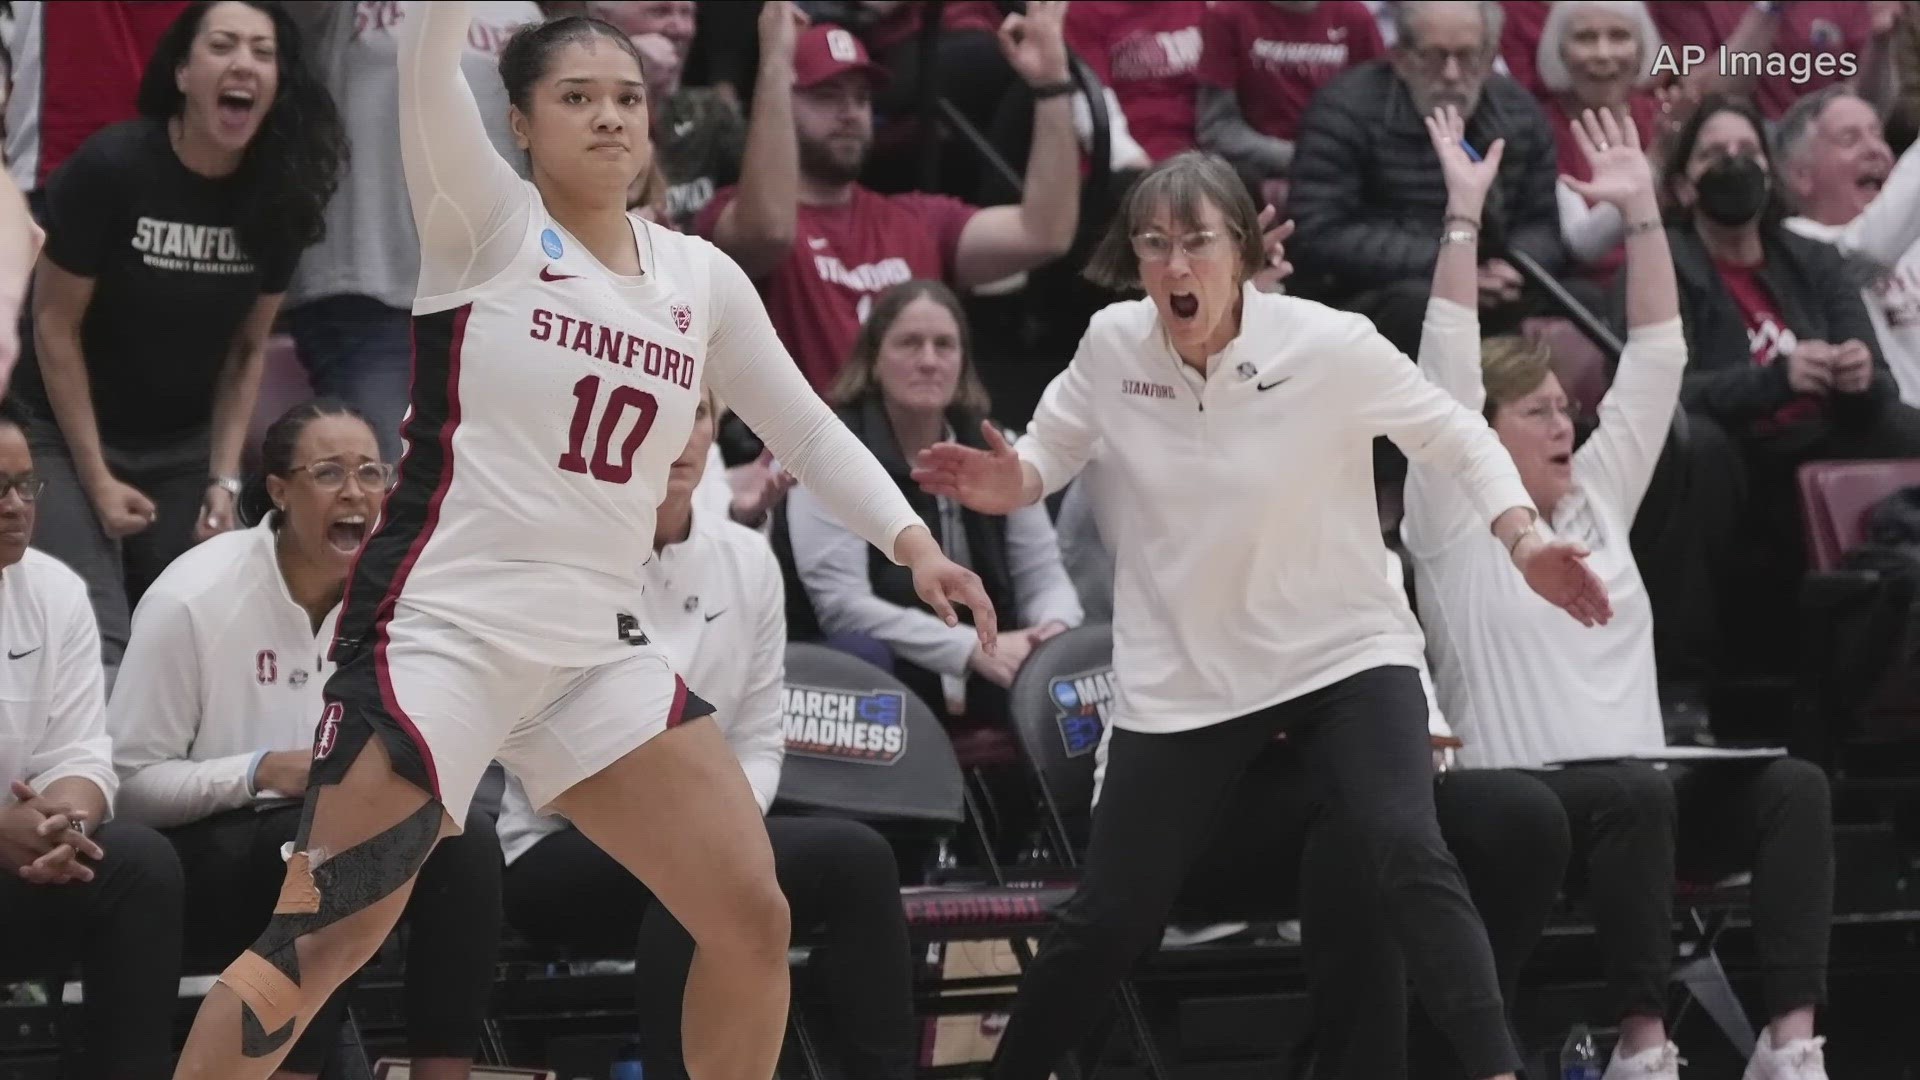 End of an era for a WNY native Stanford basketball coach